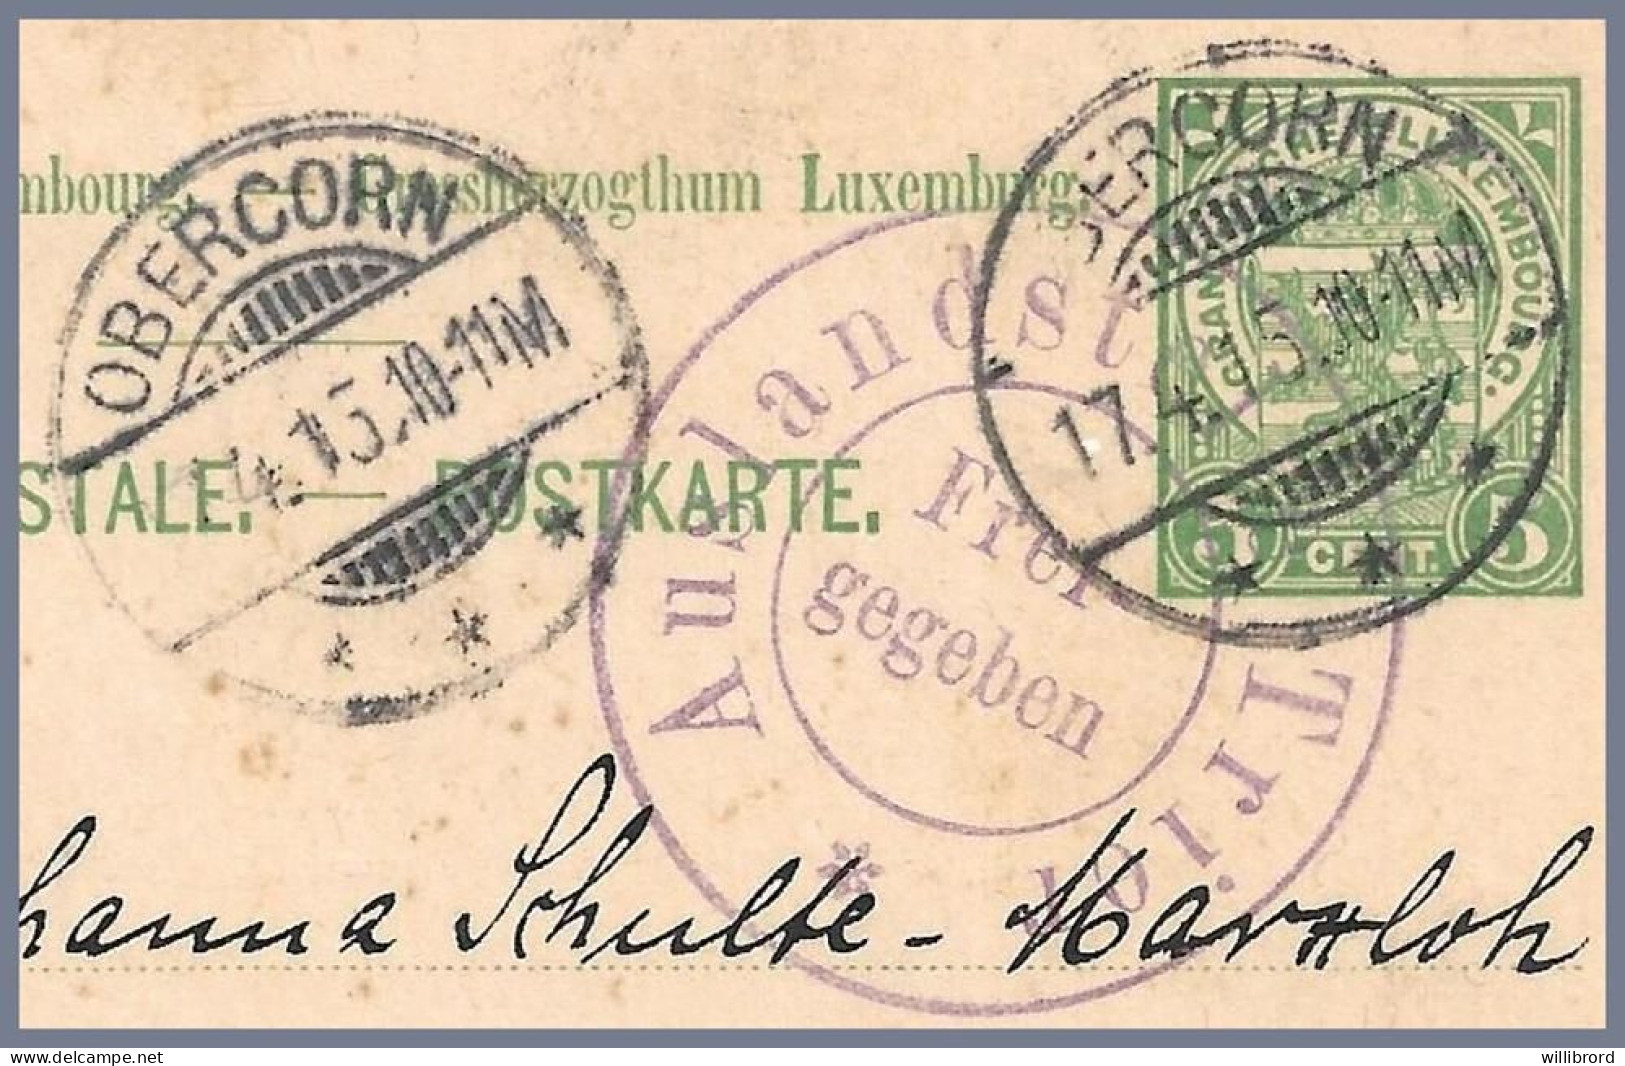 LUXEMBOURG - 1915 OBERCORN T-33 - 5c Arms Postal Card To Umstand-Kettwig, Germany. WW1 Censor. - Stamped Stationery